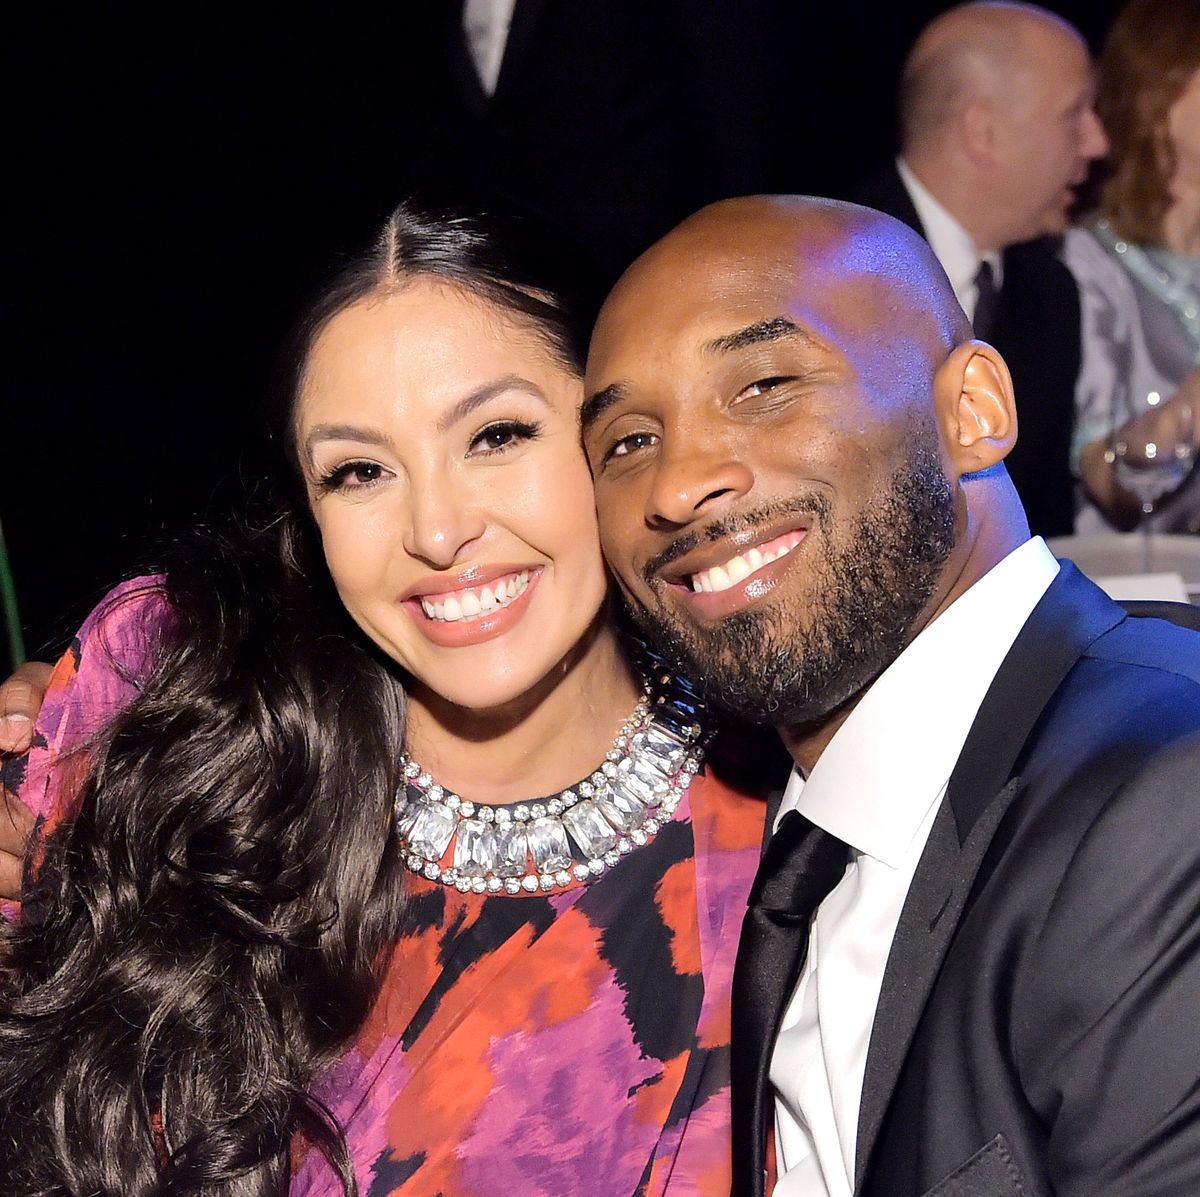 KOBE BRYANT AND WIFE VANESSA BRYANT ARE EXPECTING A BABY ON THE WAY